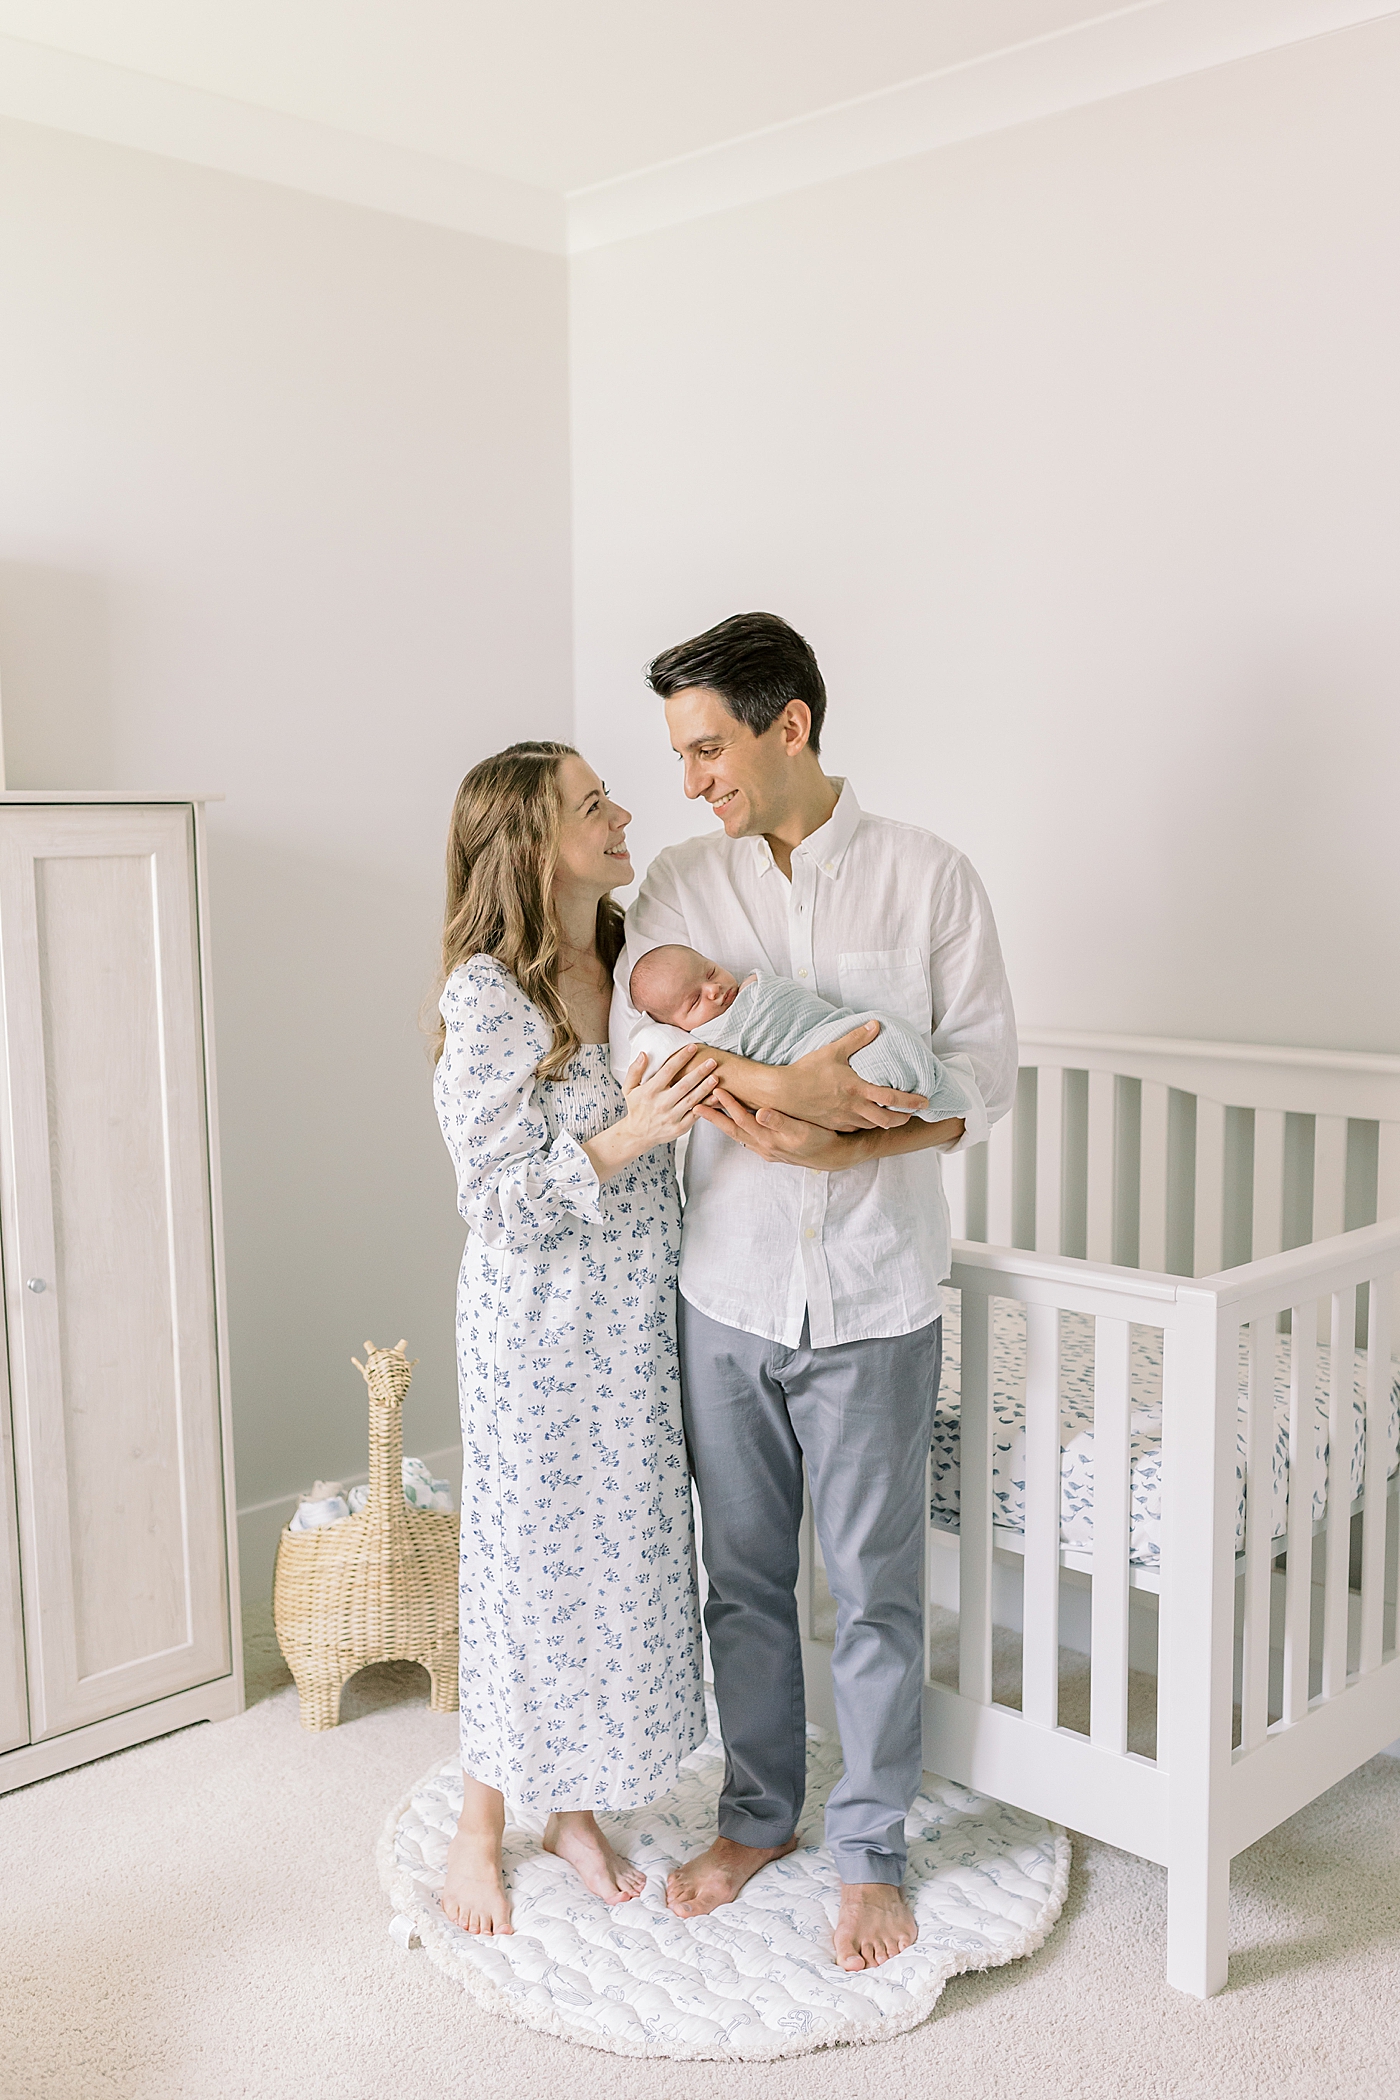 Mom and dad holding their baby in nursery during lifestyle newborn photos | Image by Caitlyn Motycka